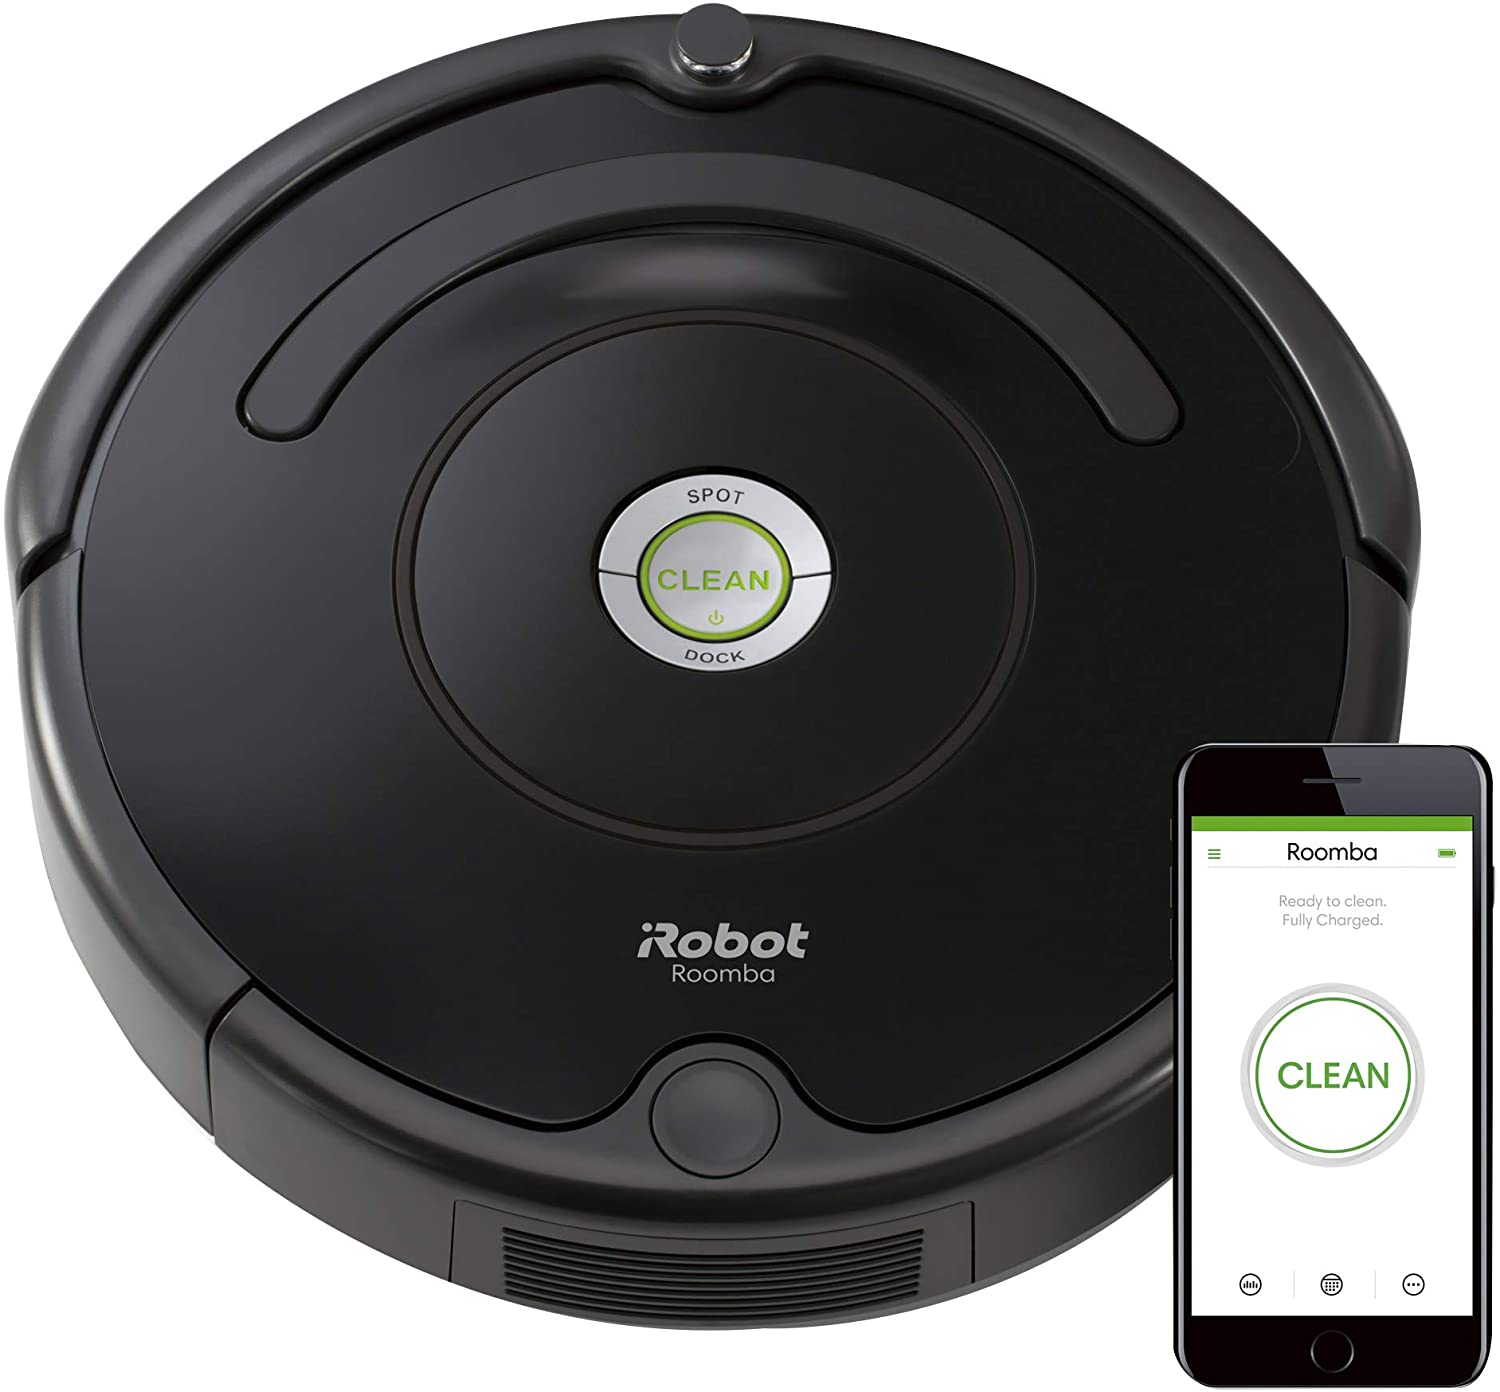 iRobot Roomba 675 Robot Vacuum-Wi-Fi Connectivity, Works with Alexa, Good for Pet Hair, Carpets, Hard Floors, Self-Charging - image 4 of 9